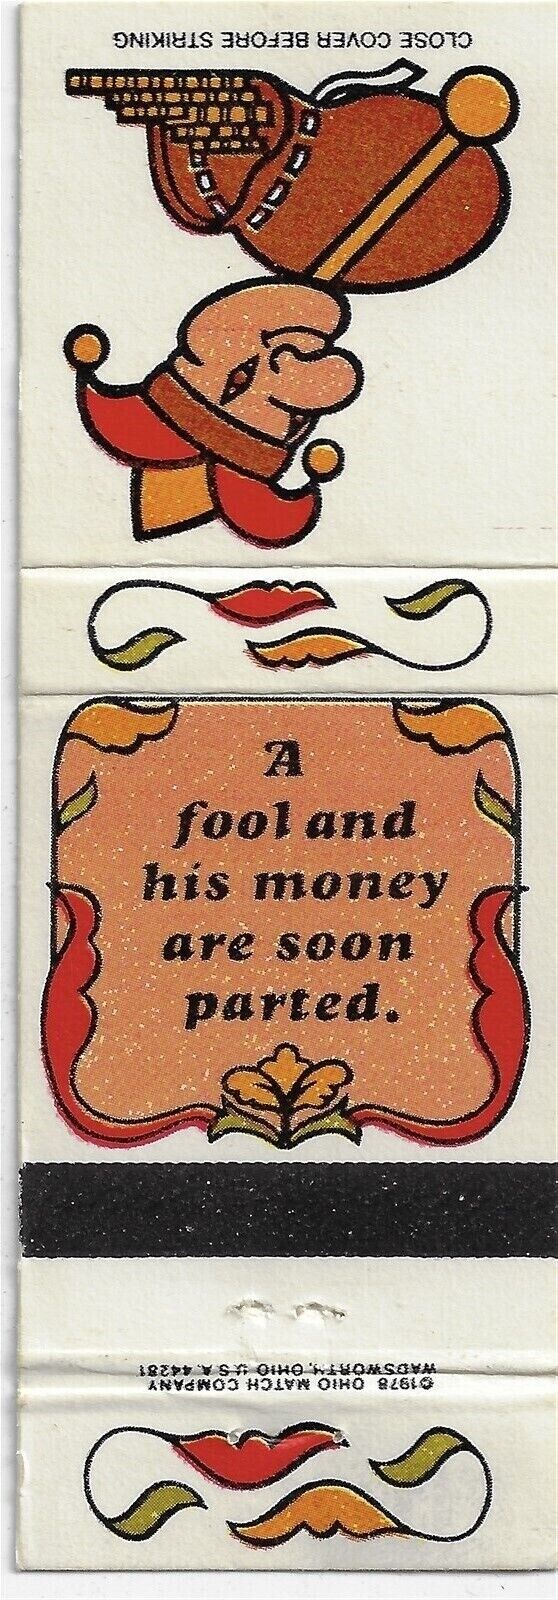 Empty  Matchbook Cover Complete Your Set A fool and his money are soon parted